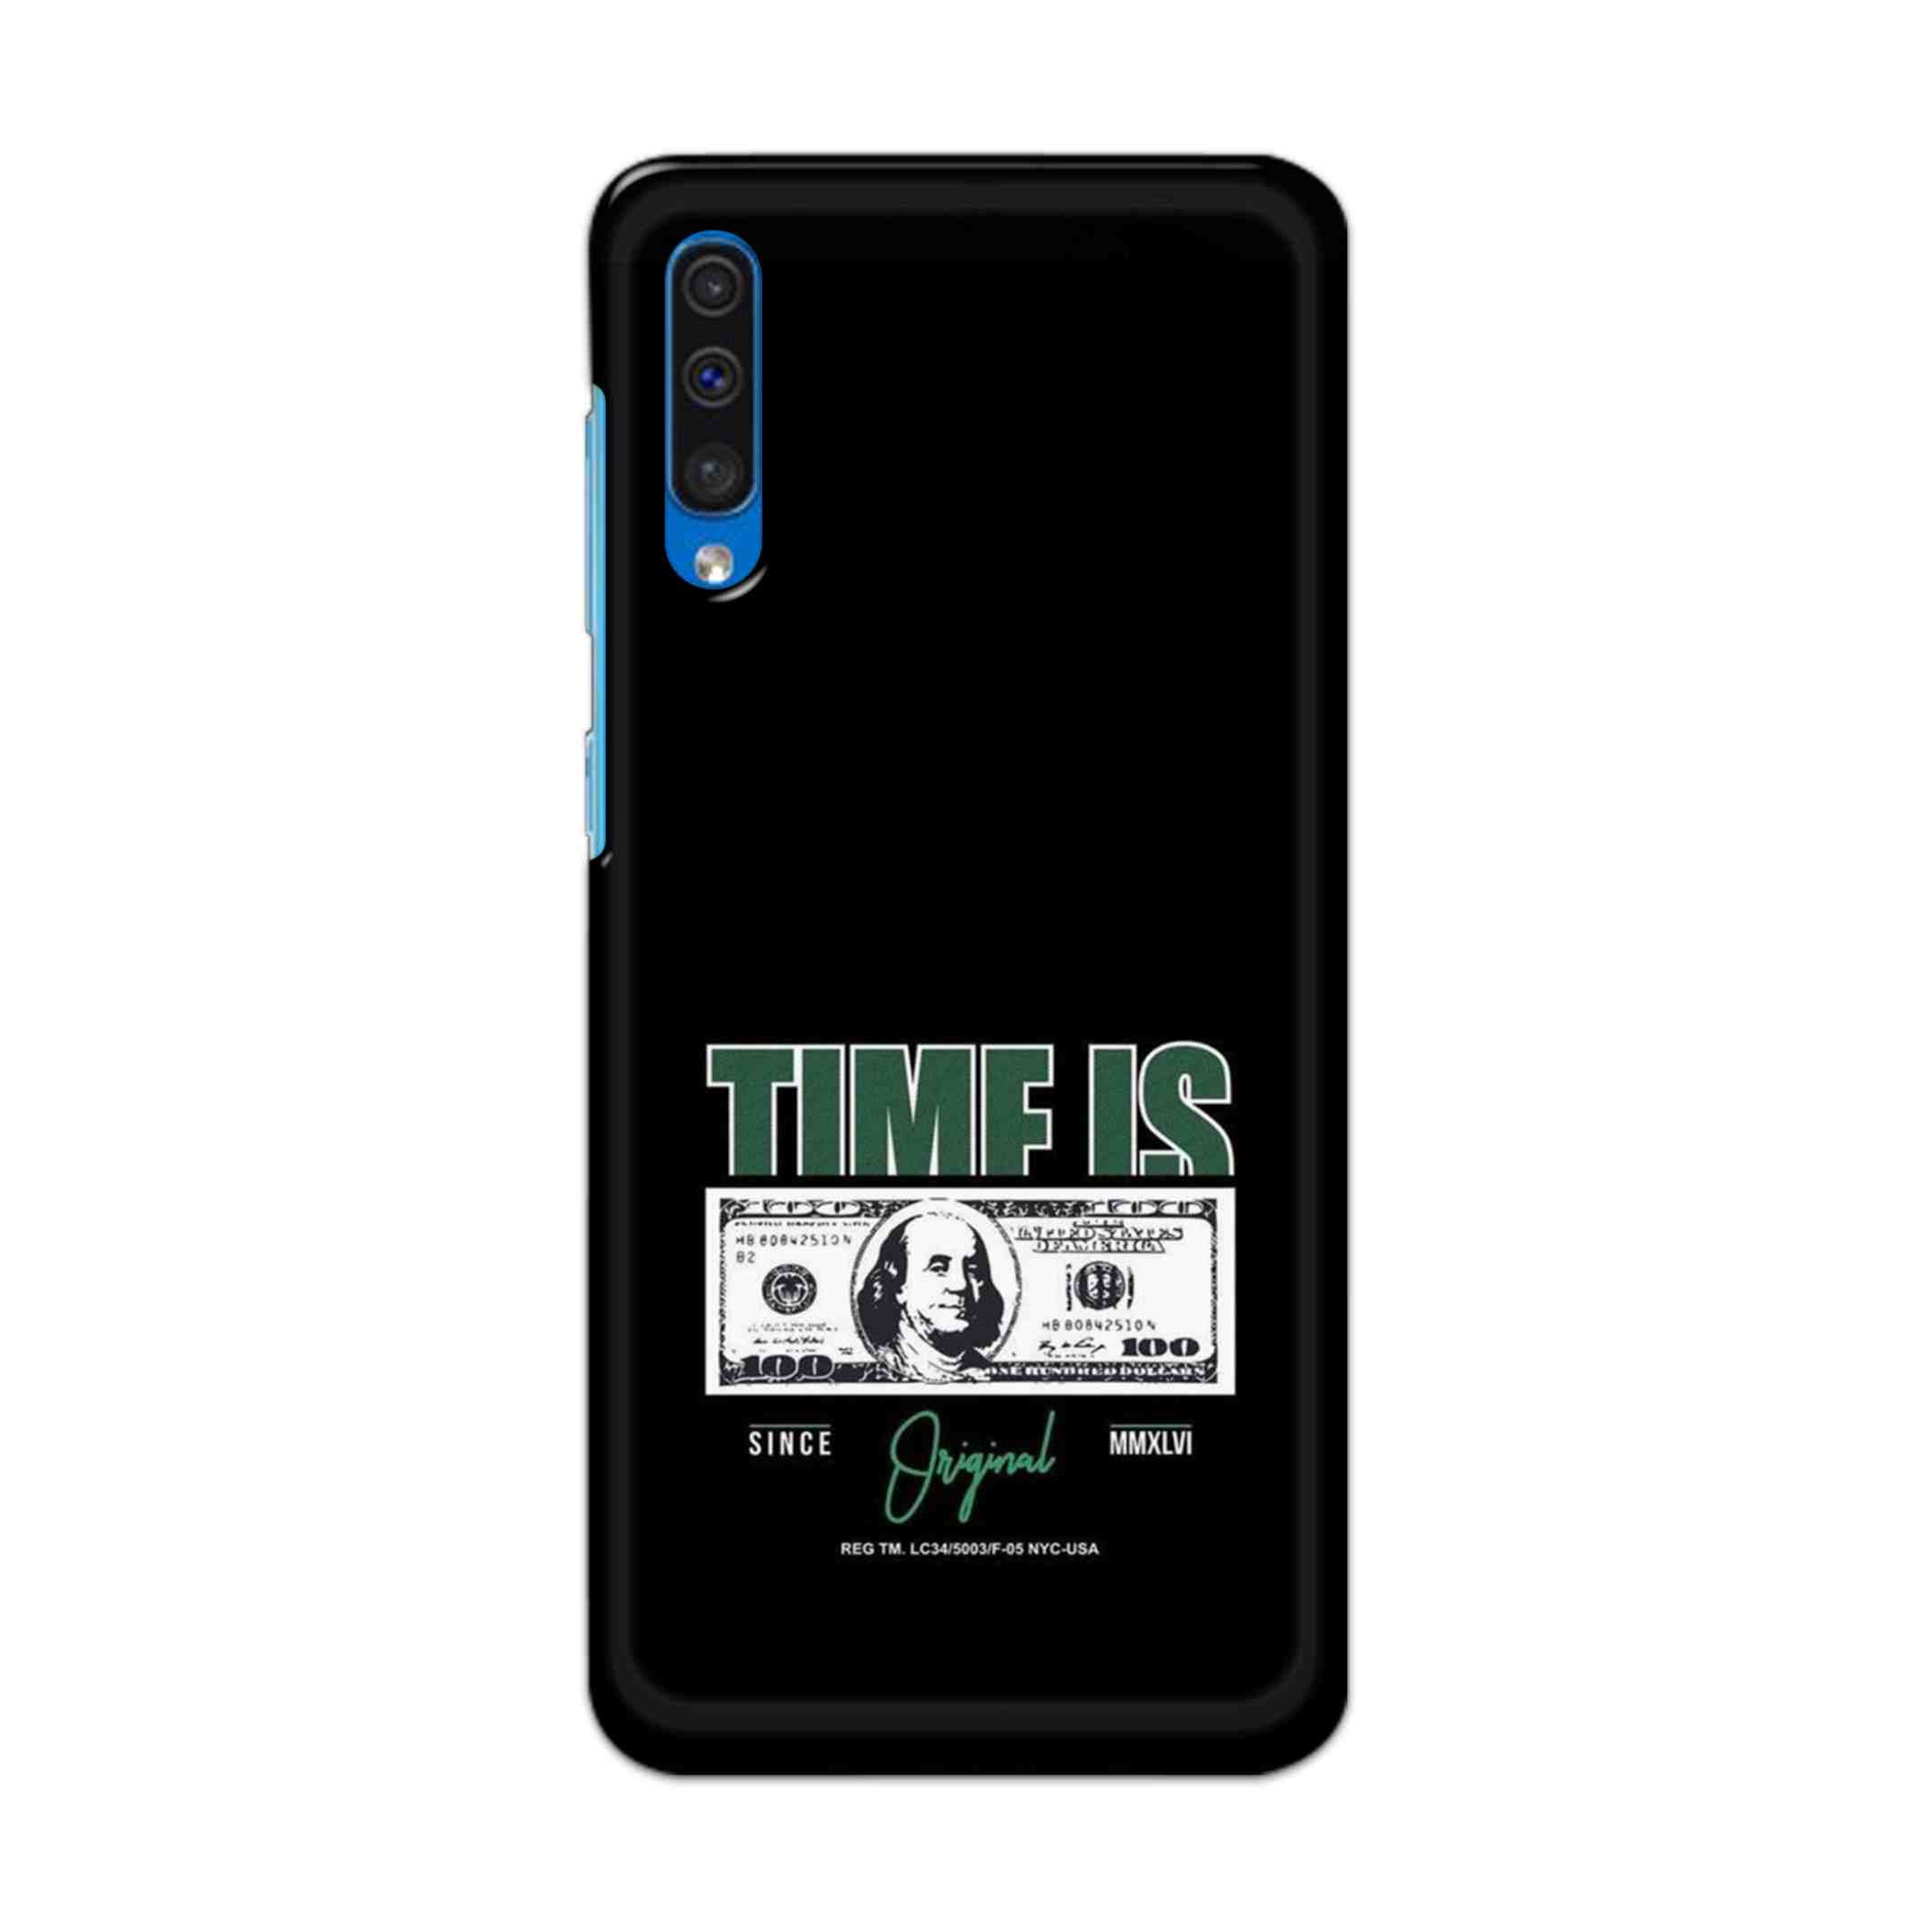 Buy Time Is Money Hard Back Mobile Phone Case Cover For Samsung Galaxy A50 / A50s / A30s Online